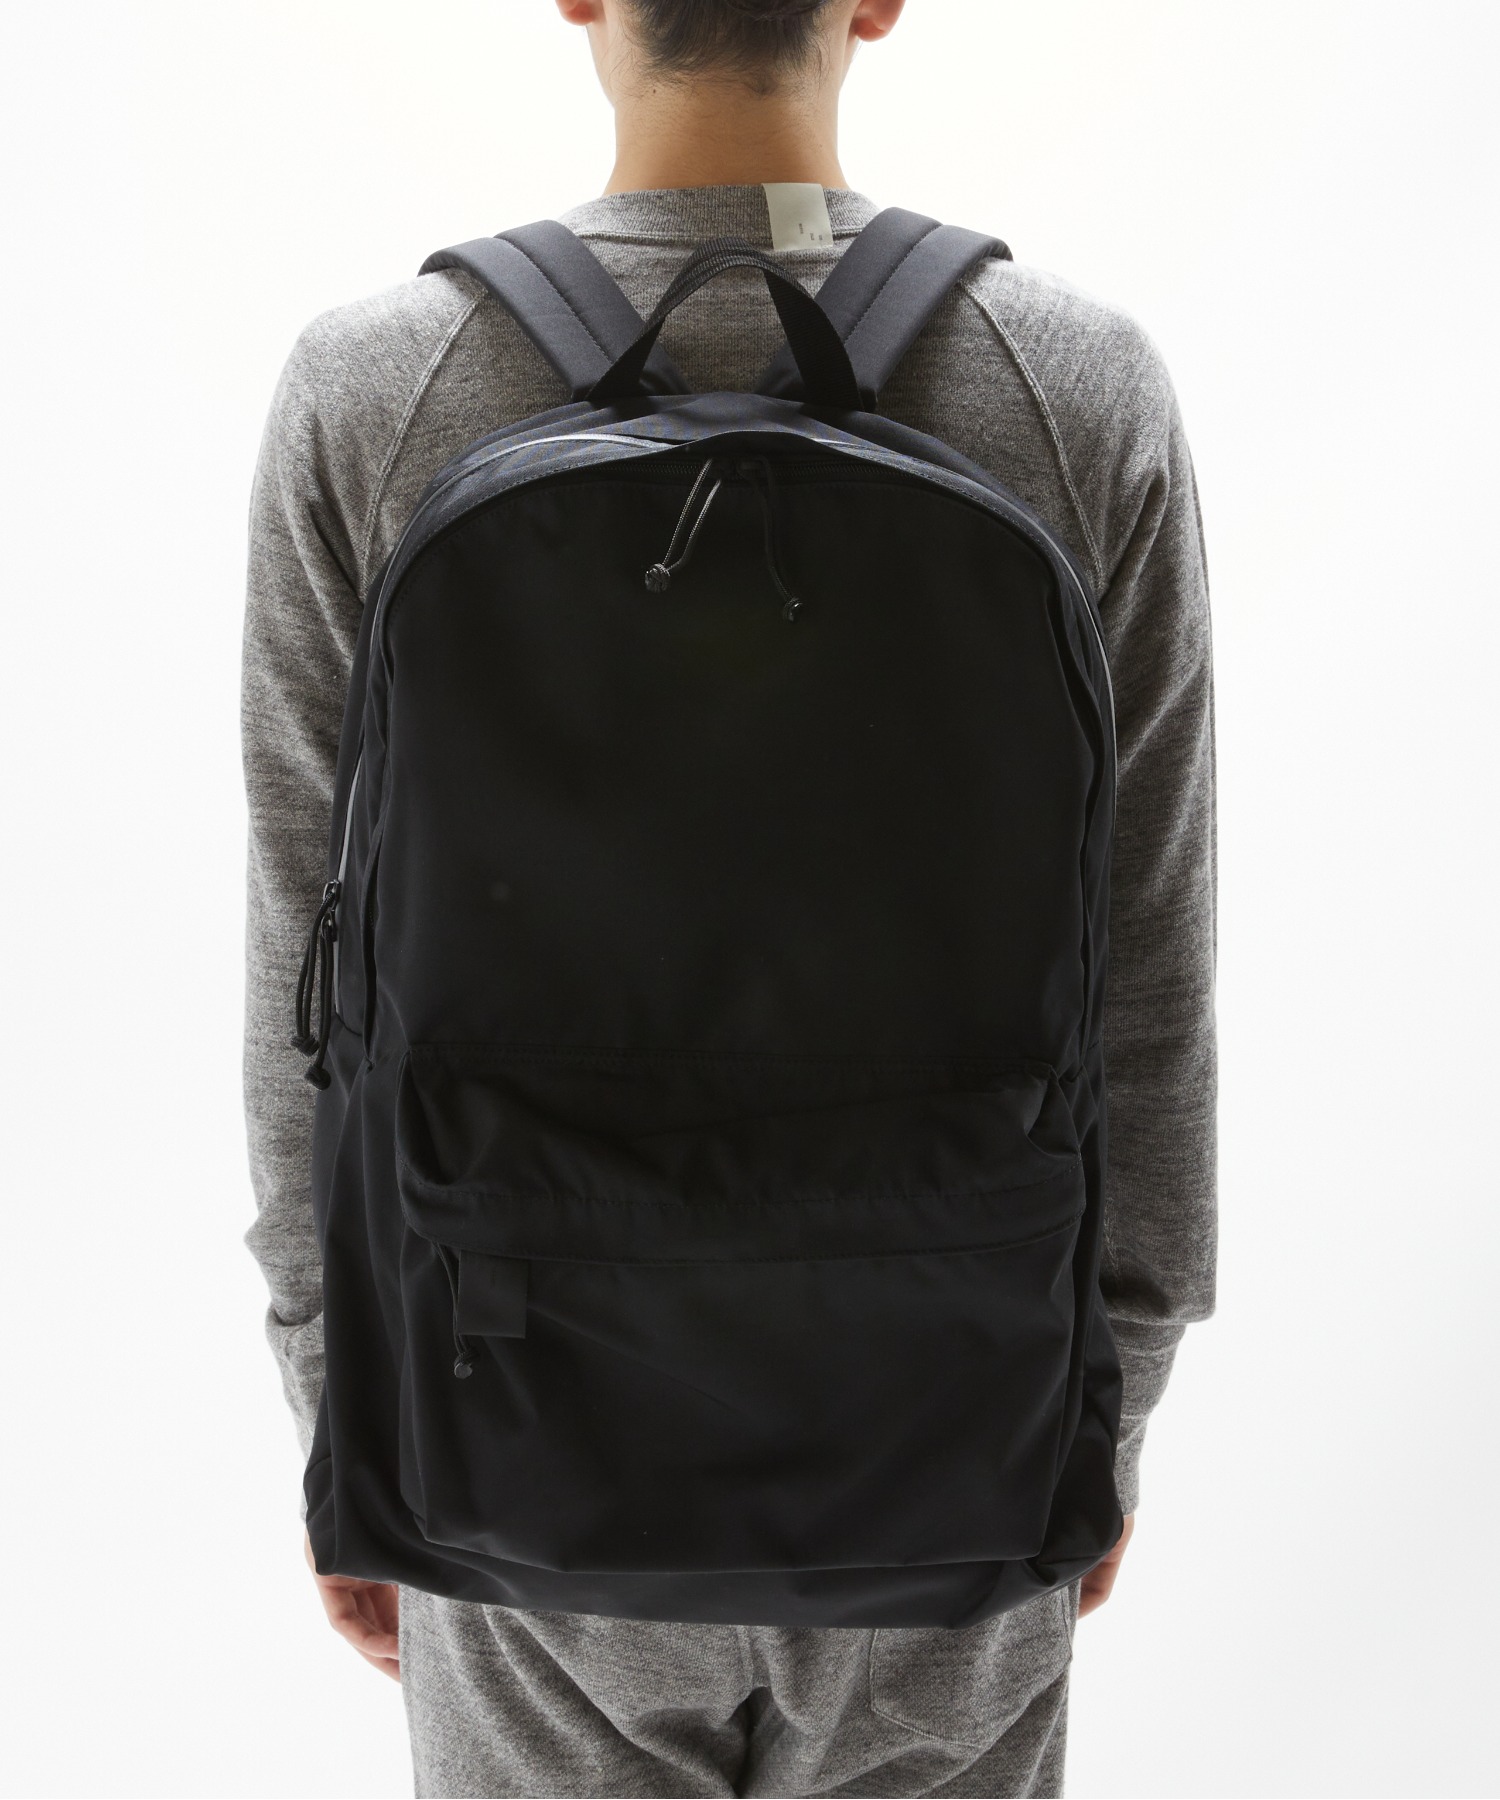 BACKPACK (EXTRA LARGE)